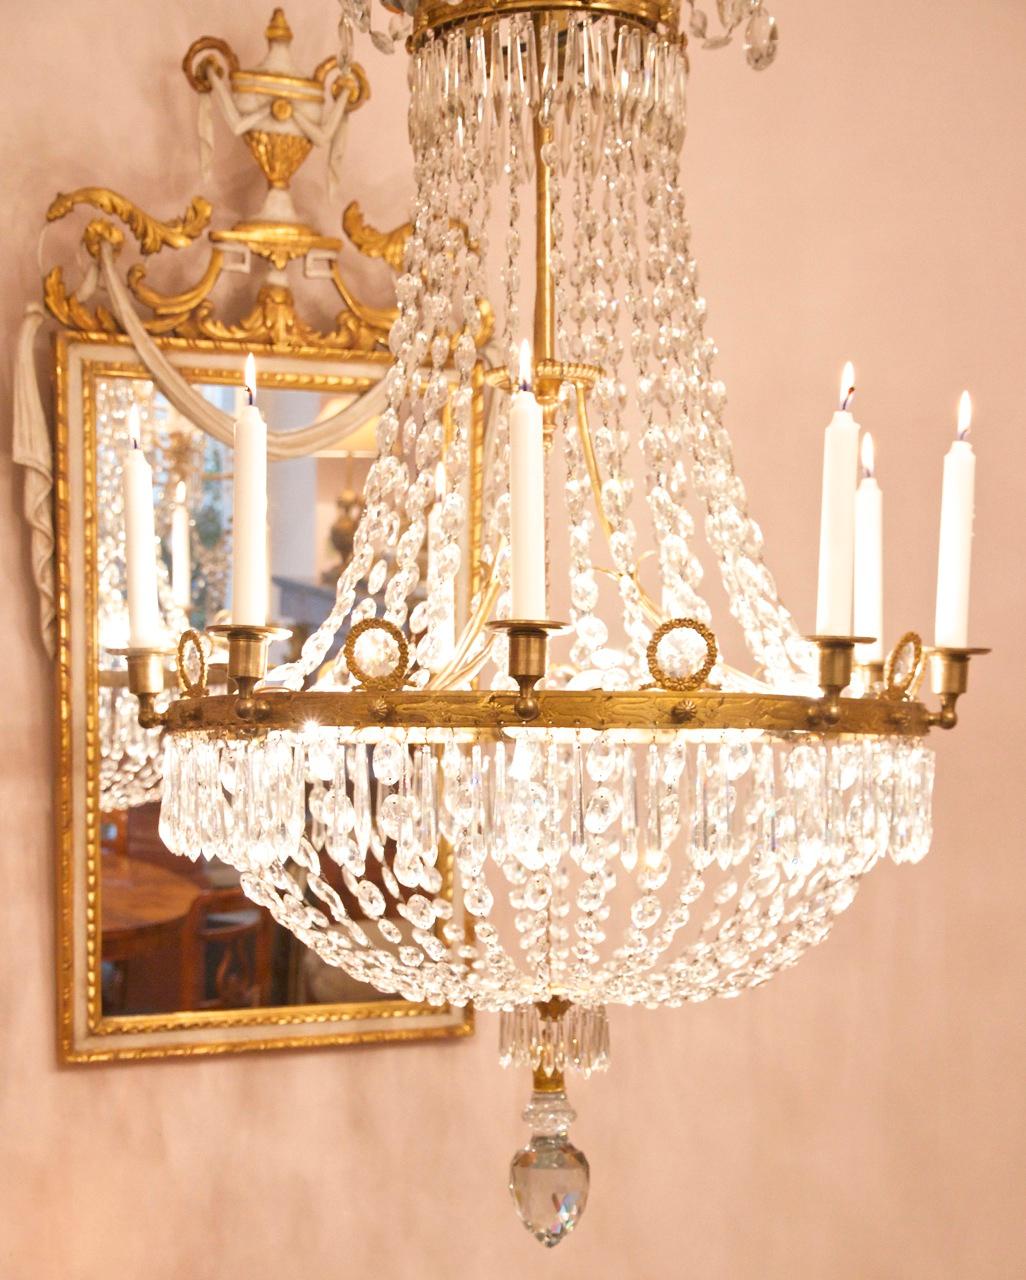 French Early 19th Century Empire Crystal-Cut and Gilt-Bronze Basket Chandelier

A finely proportioned Empire gilt bronze and crystal-cut nine light tent and bag Chandelier. With an anthemion cast corona suspending chains of graduated almond shaped